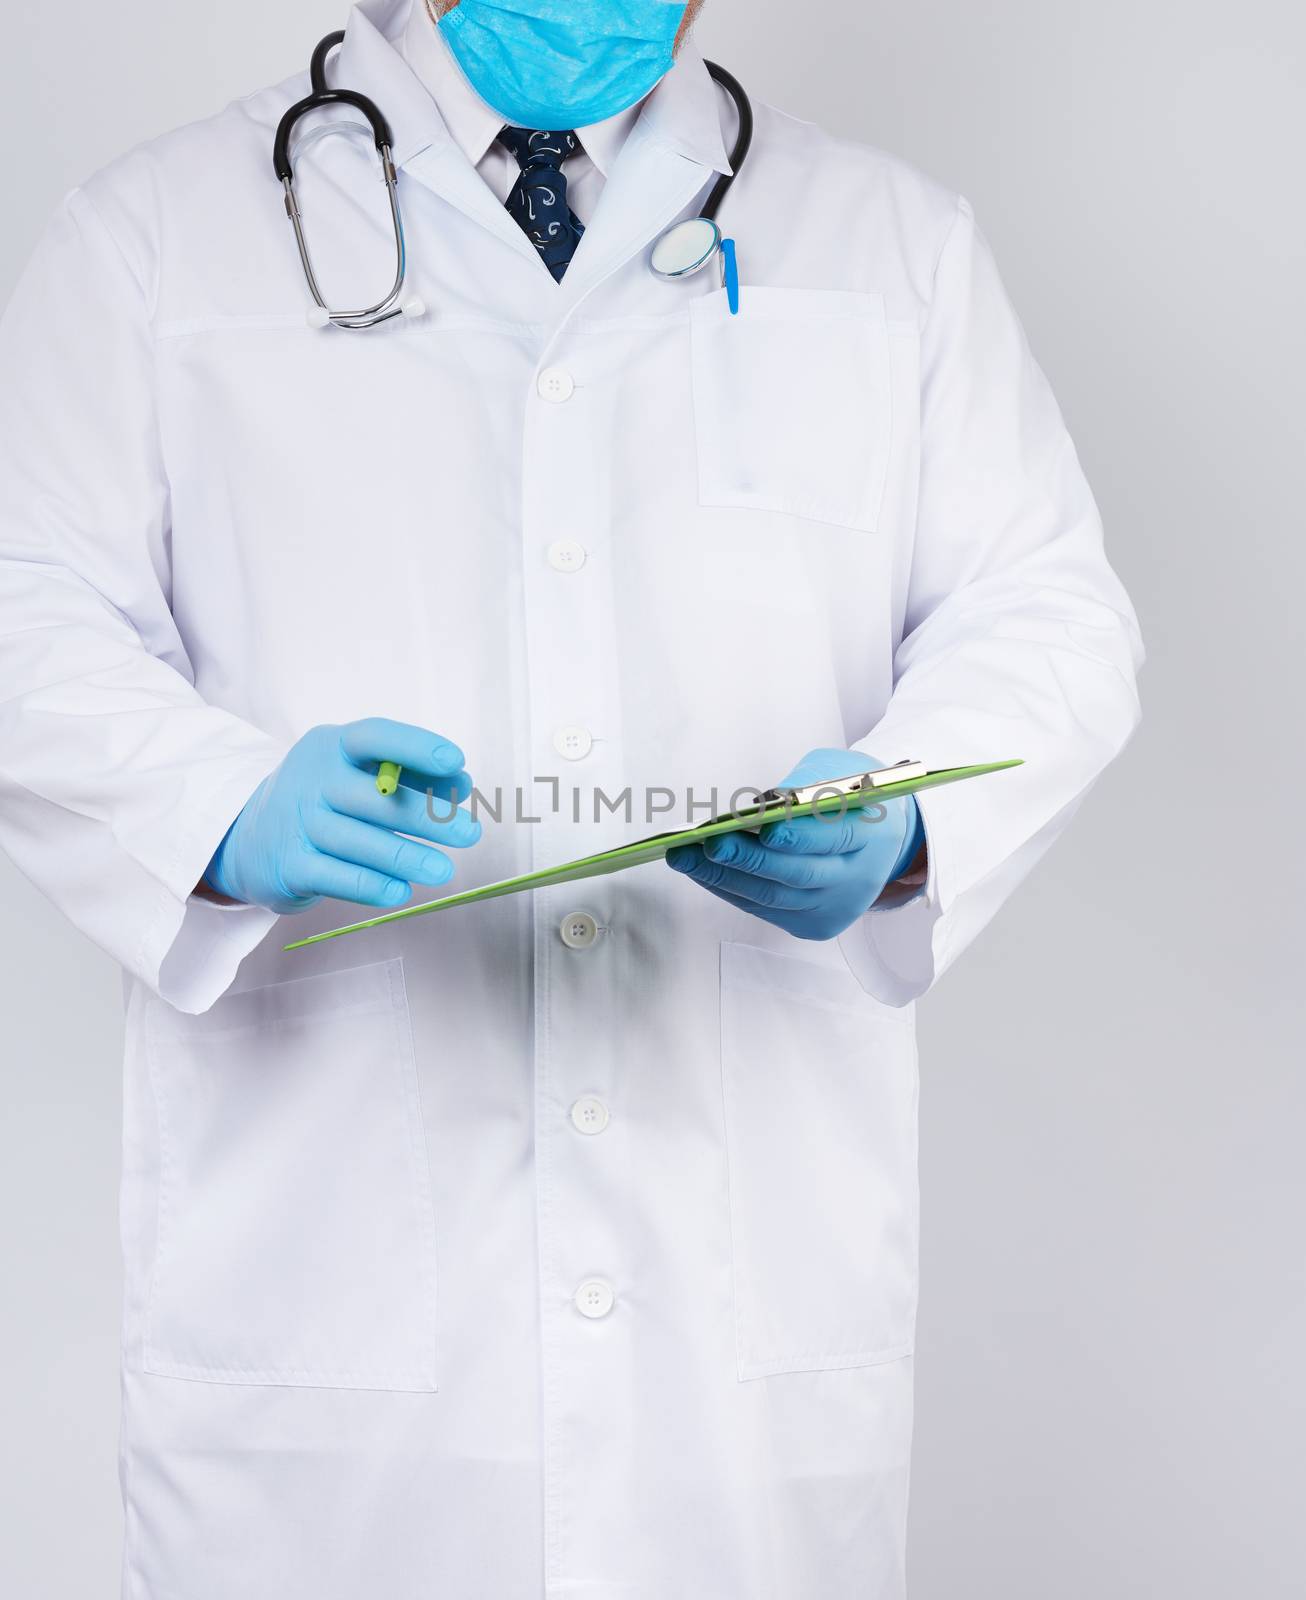 doctor in a white coat and medical blue gloves records a patient’s medical history, close up